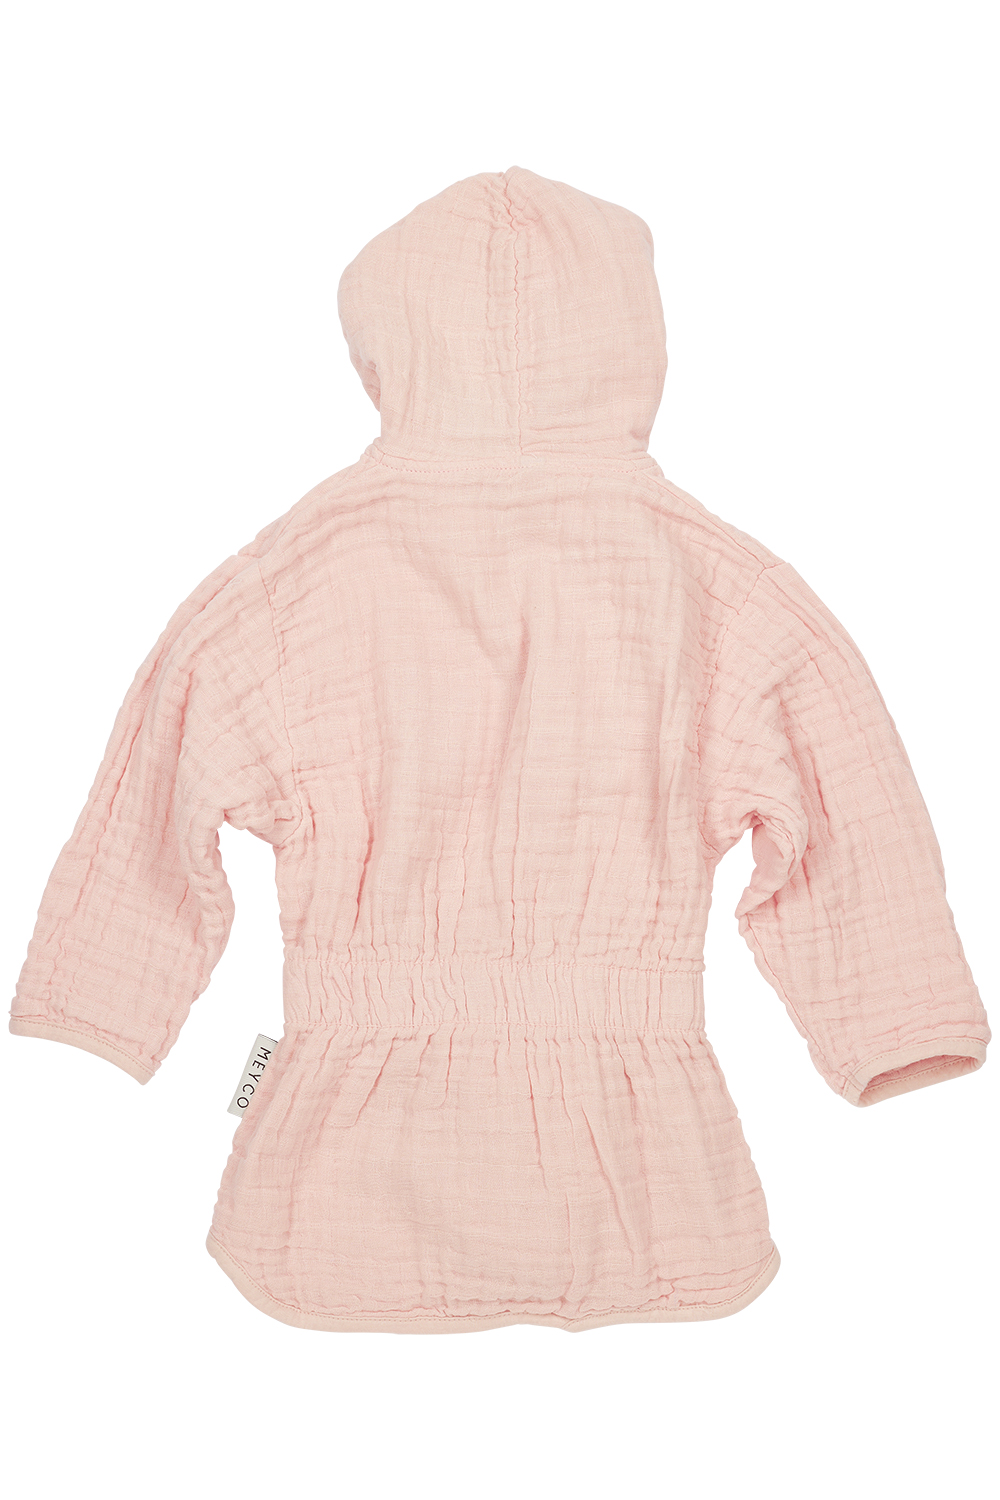 Bademantel pre-washed musselin Uni - soft pink - 86/92